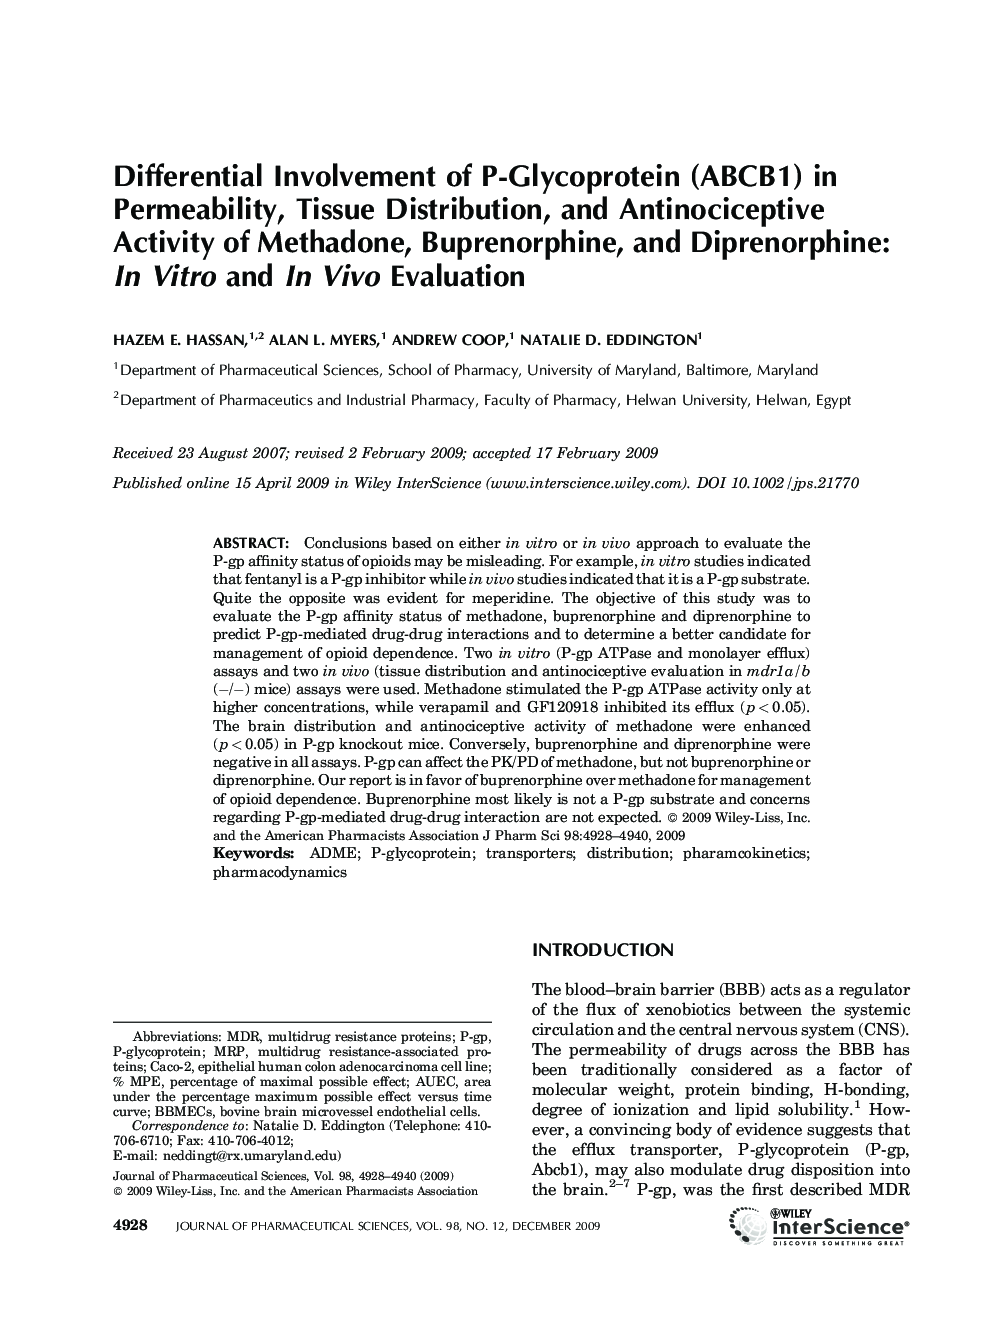 Differential Involvement of P-Glycoprotein (ABCB1) in Permeability, Tissue Distribution, and Antinociceptive Activity of Methadone, Buprenorphine, and Diprenorphine: In Vitro and In Vivo Evaluation